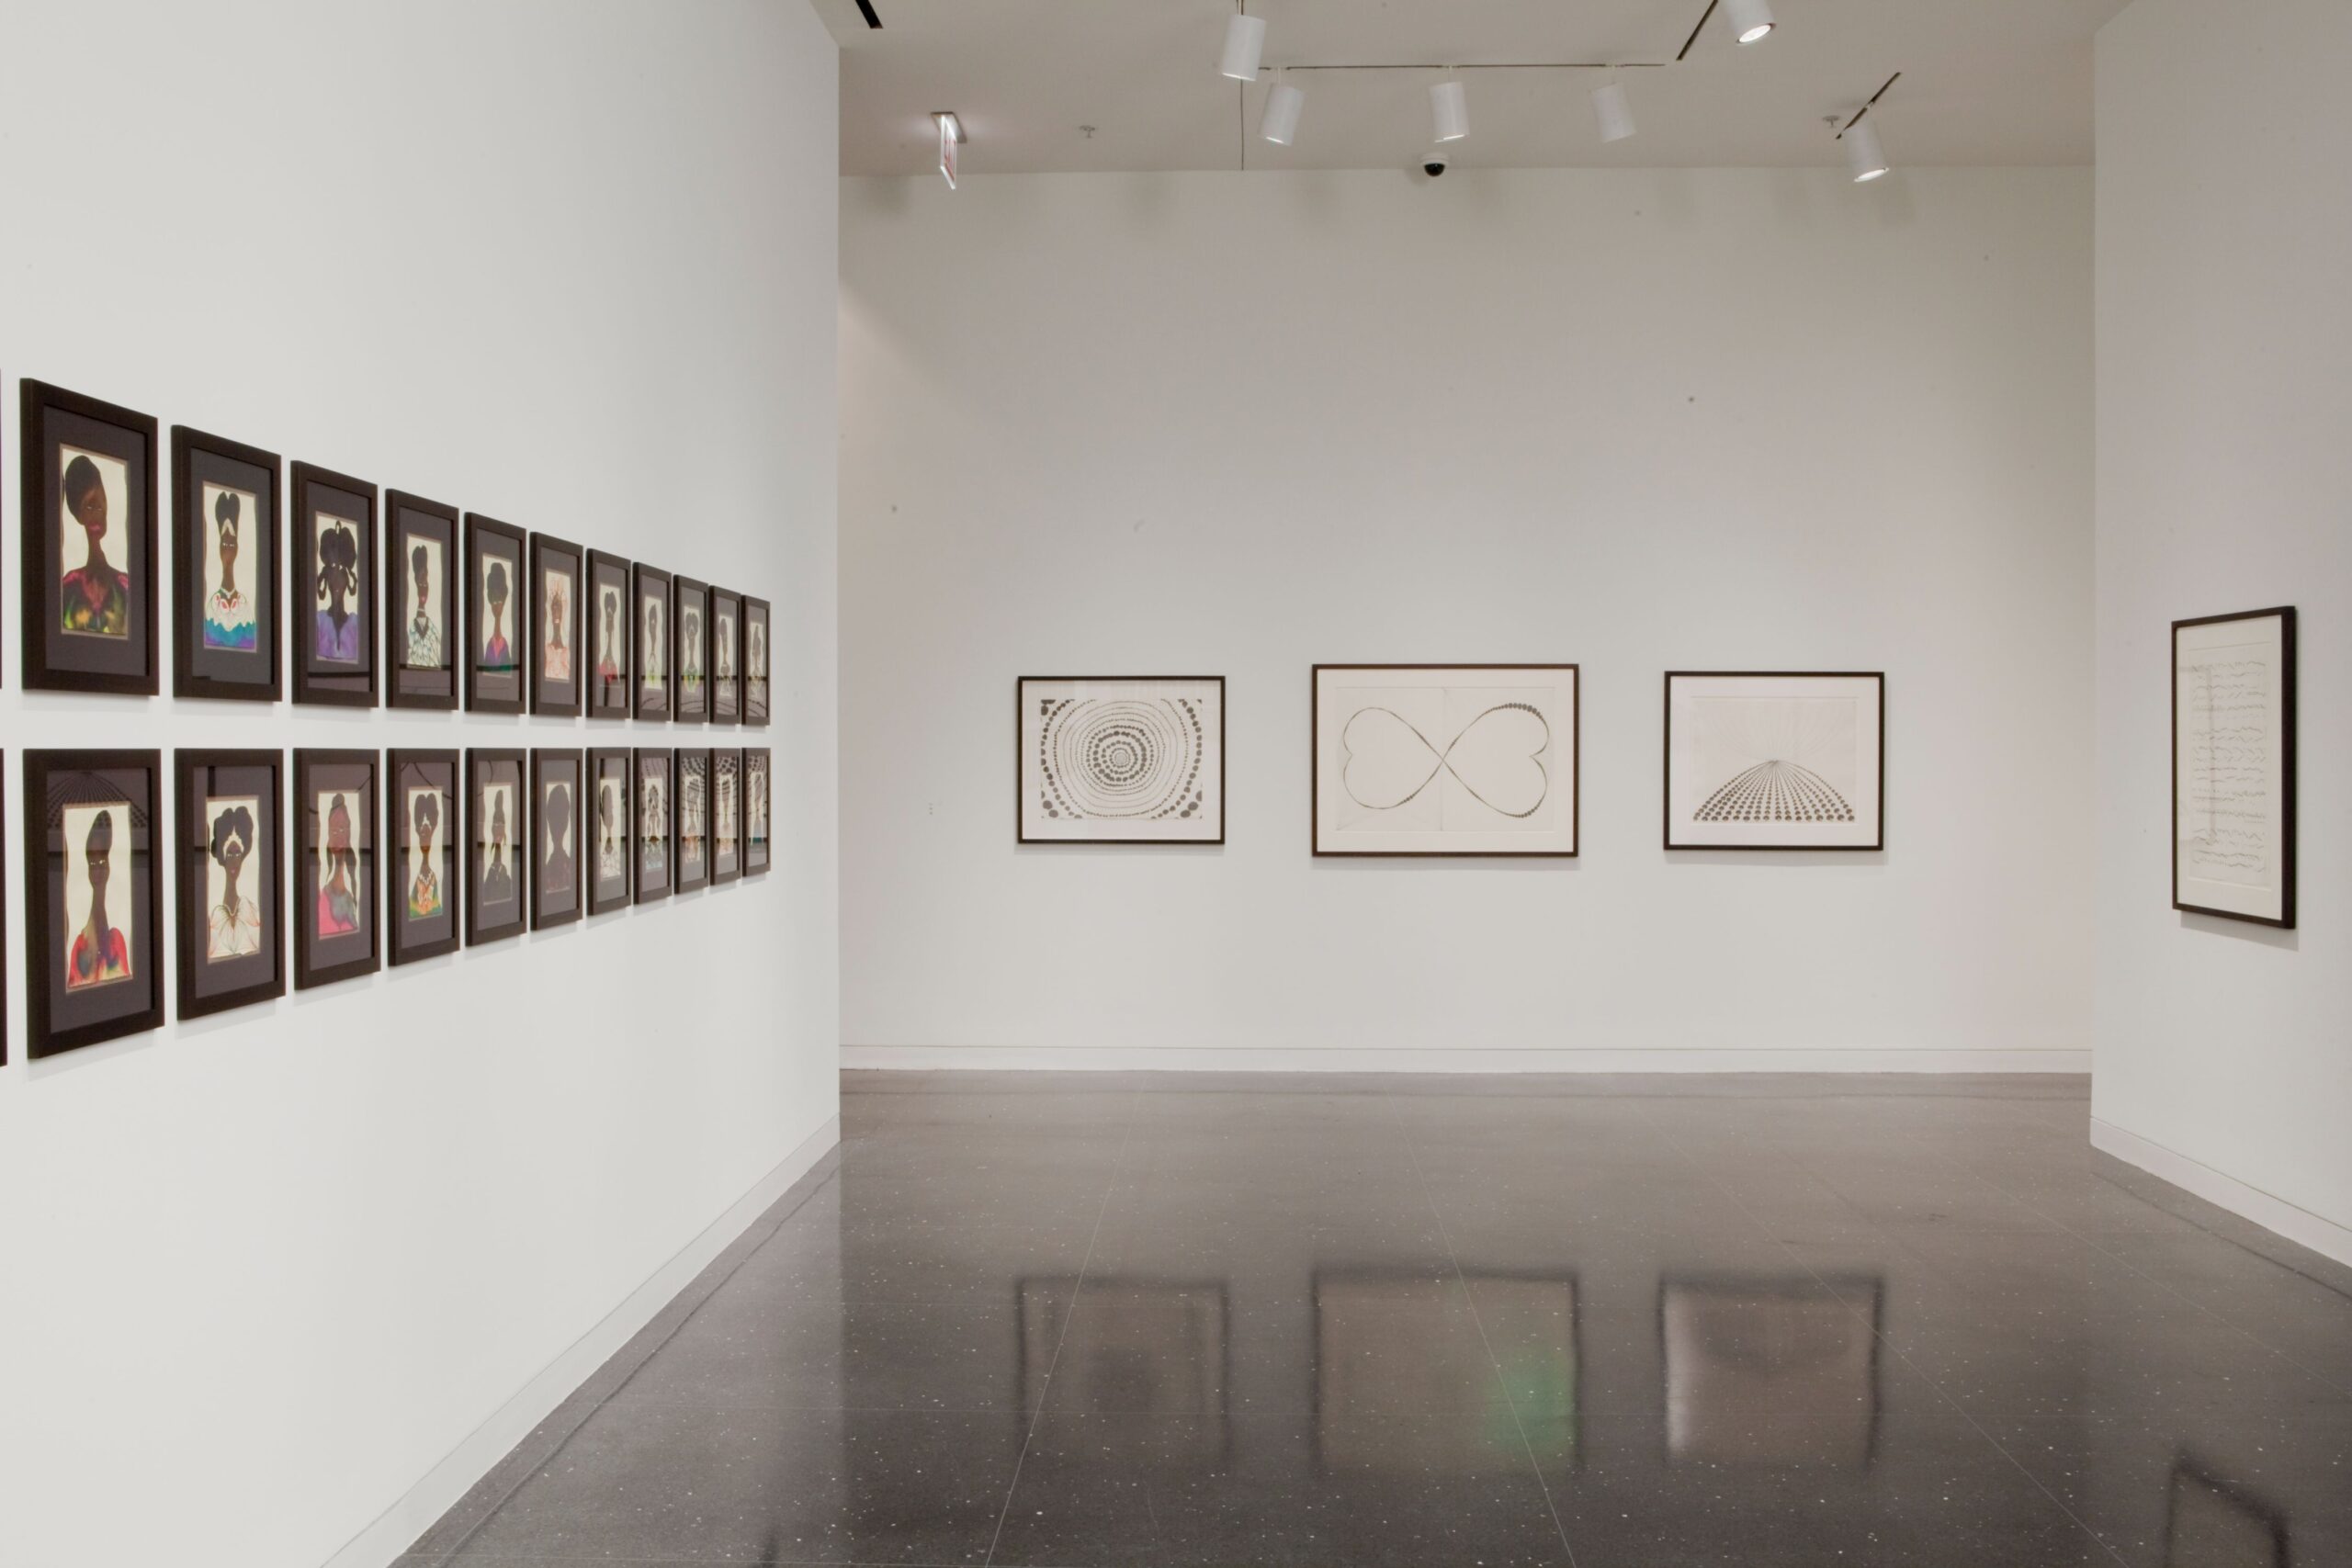 Three white gallery walls on which framed artworks hang. From left to right, the viewer can see Two rows of twelve small watercolor portraits of Black subjects in black frames, three framed and somewhat abstract drawings on white paper, and one framed drawing resembling writing or cartography.